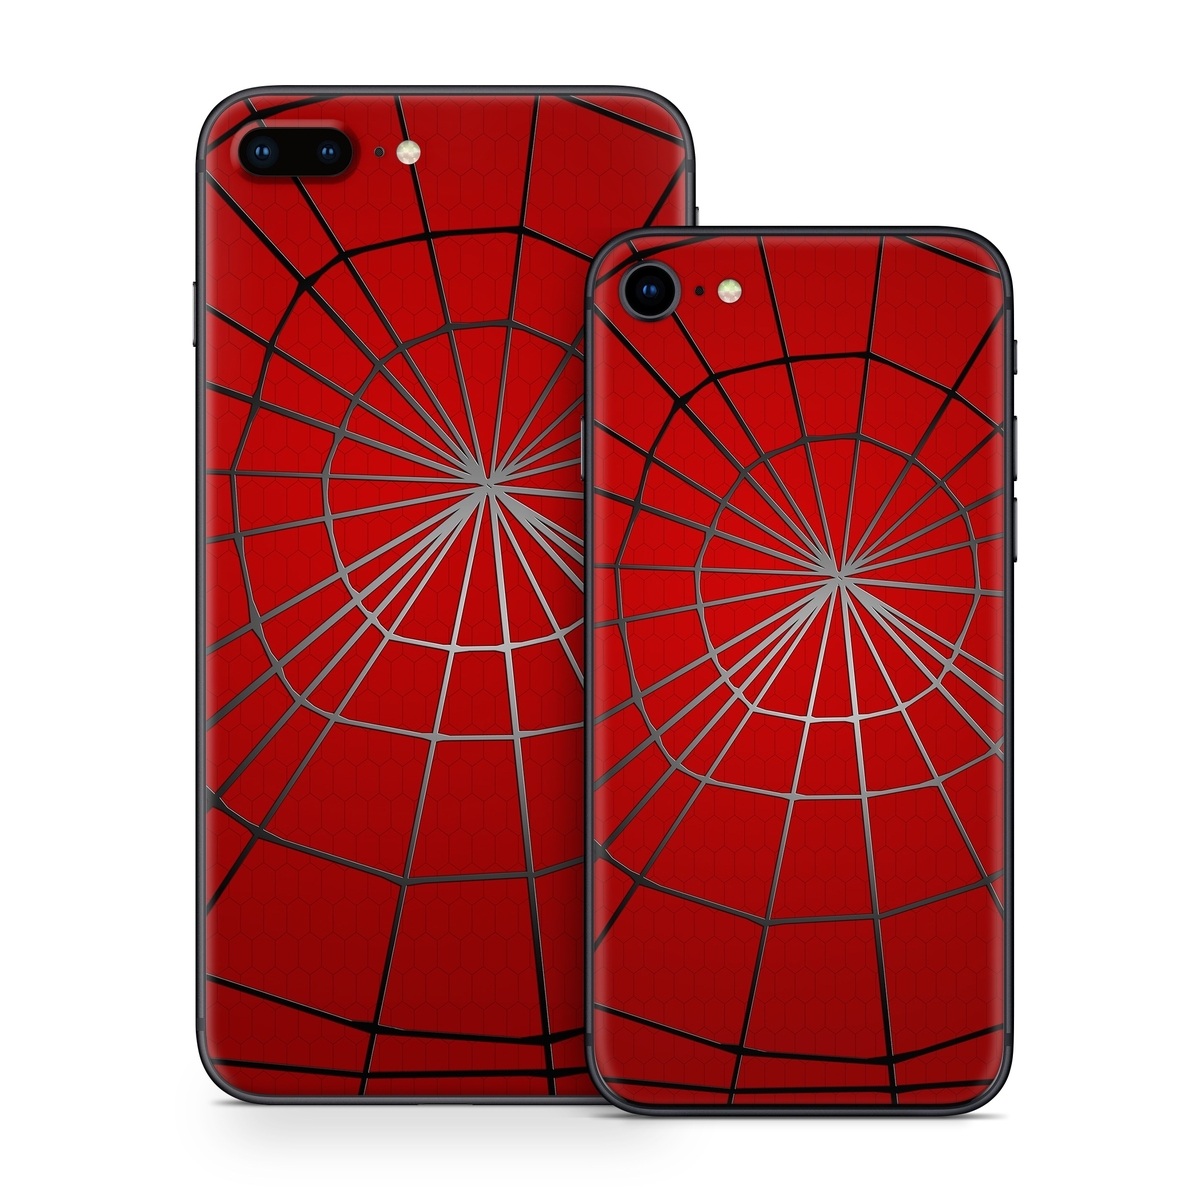 iPhone 8 Series Skin design of Red, Symmetry, Circle, Pattern, Line, with red, black, gray colors